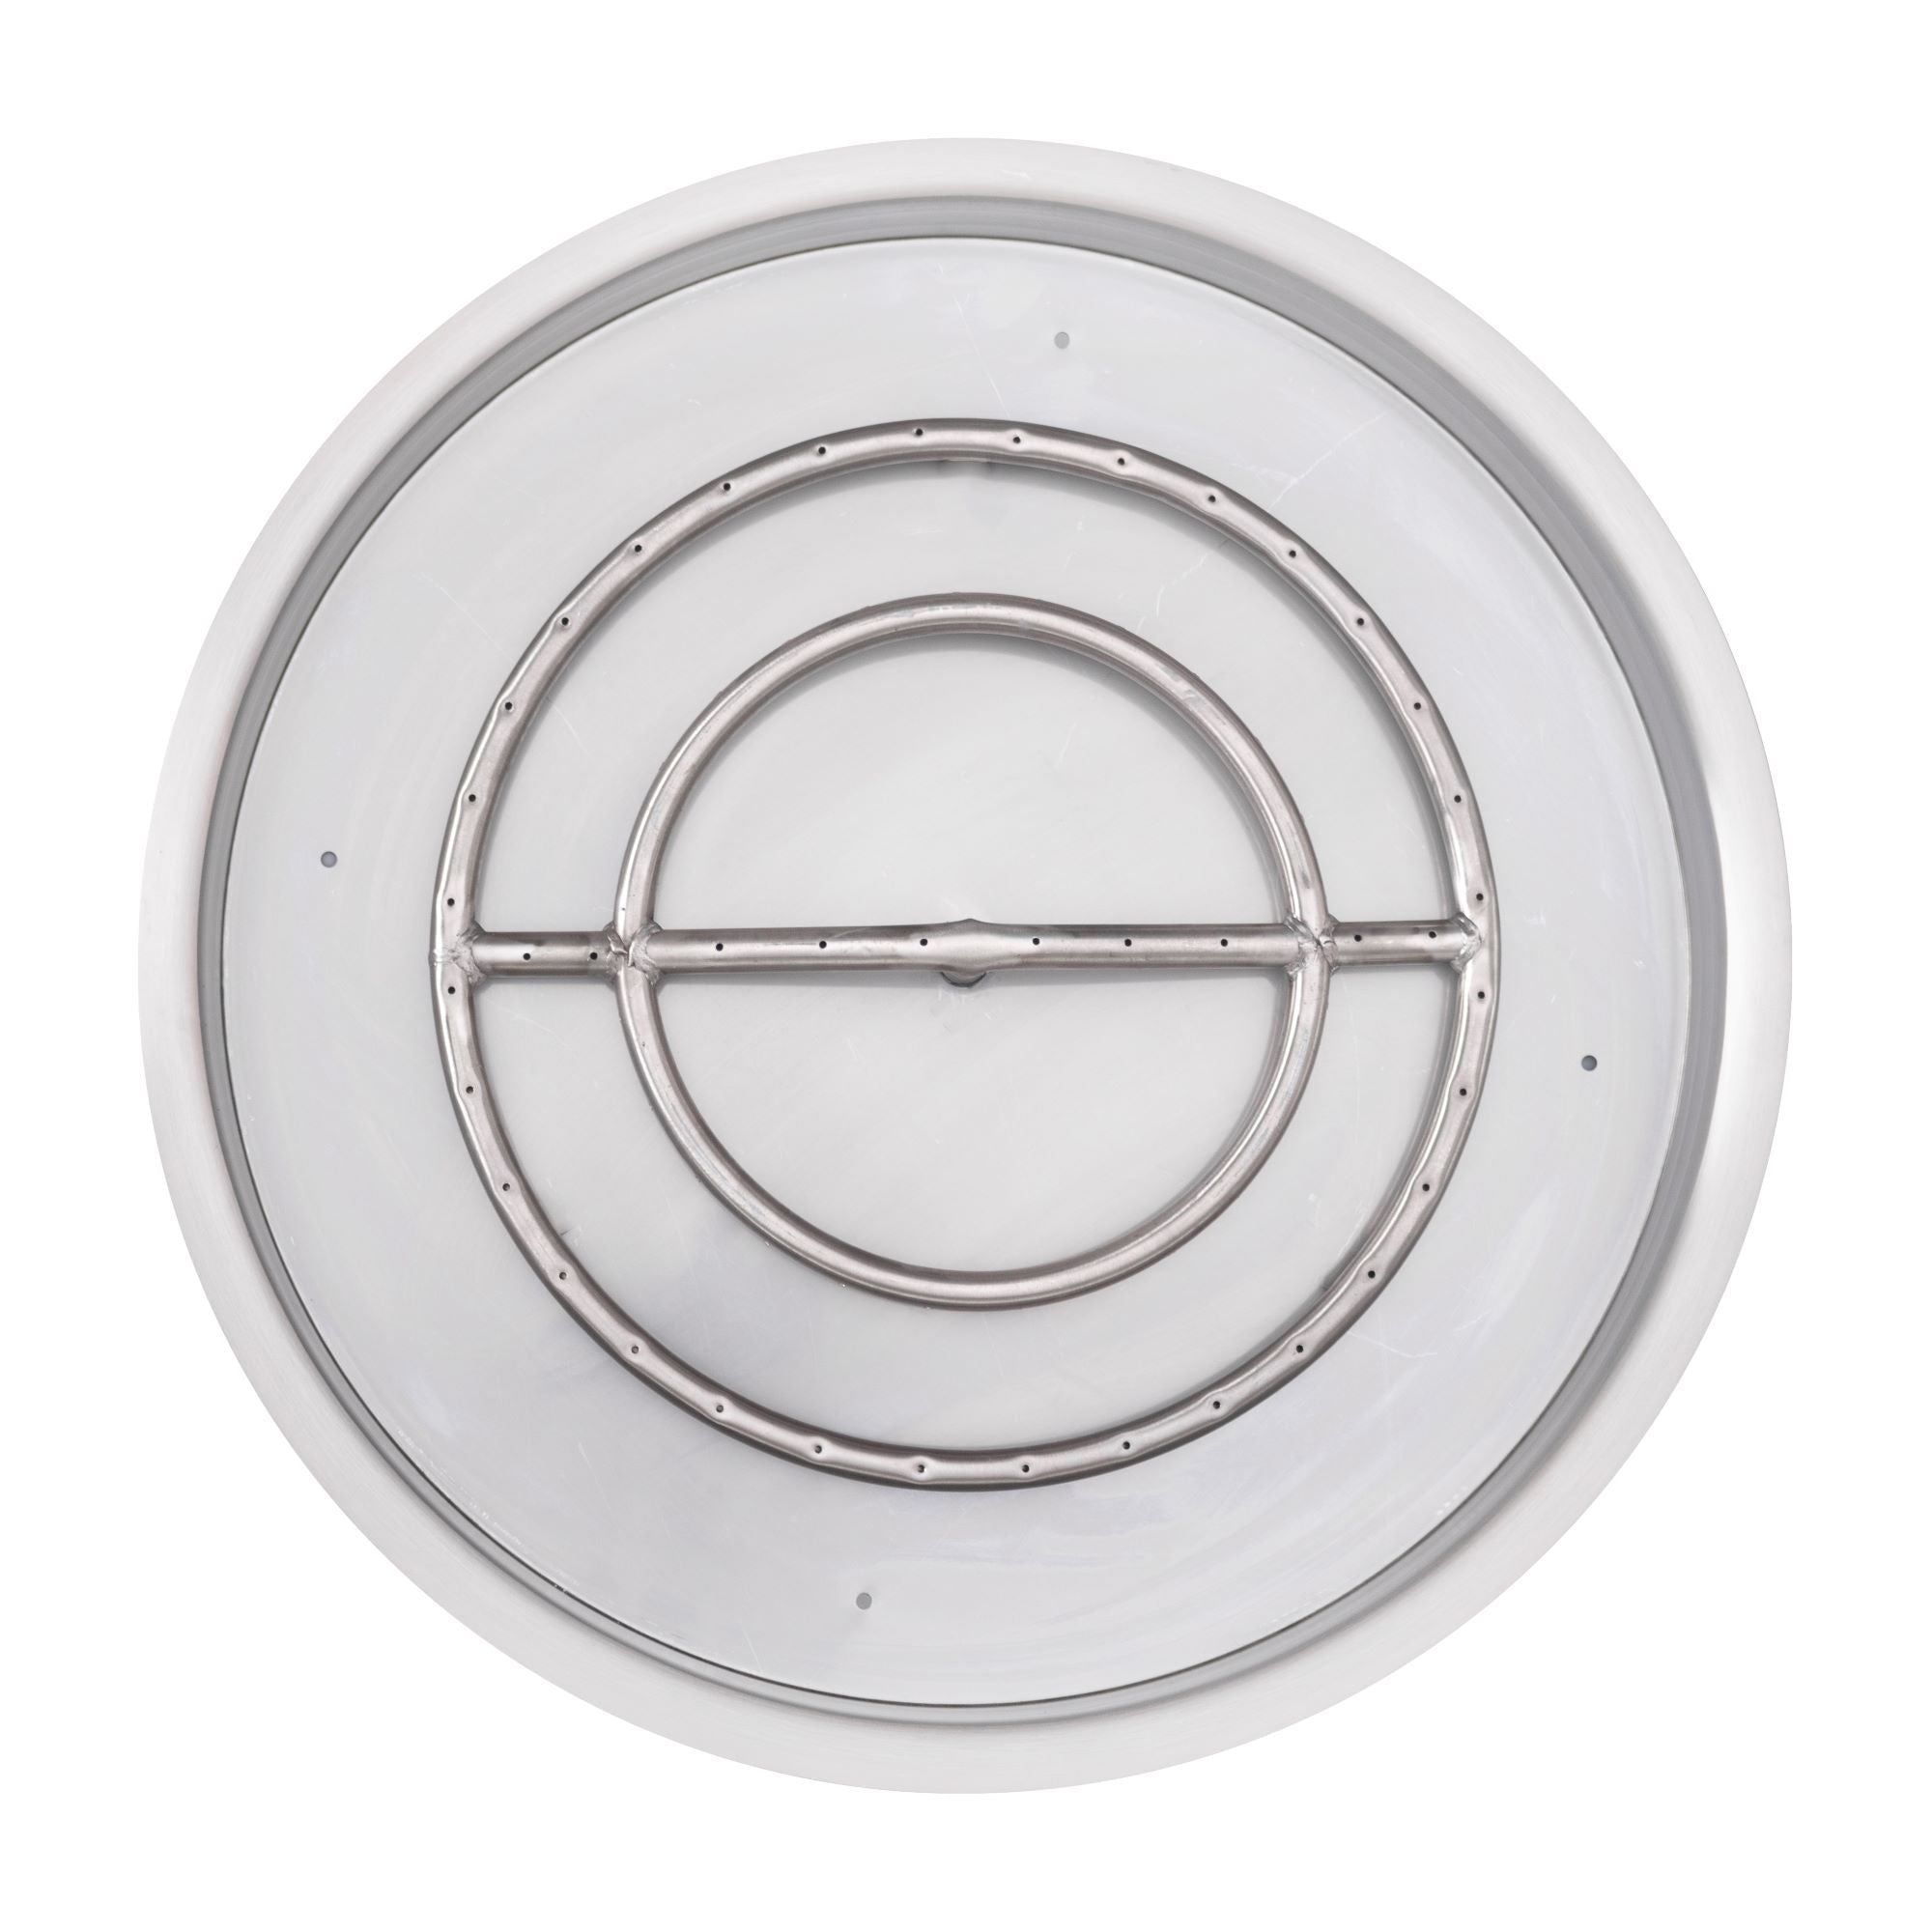 The Outdoor Plus Round Drop-in Pan with Stainless Steel Round Burner